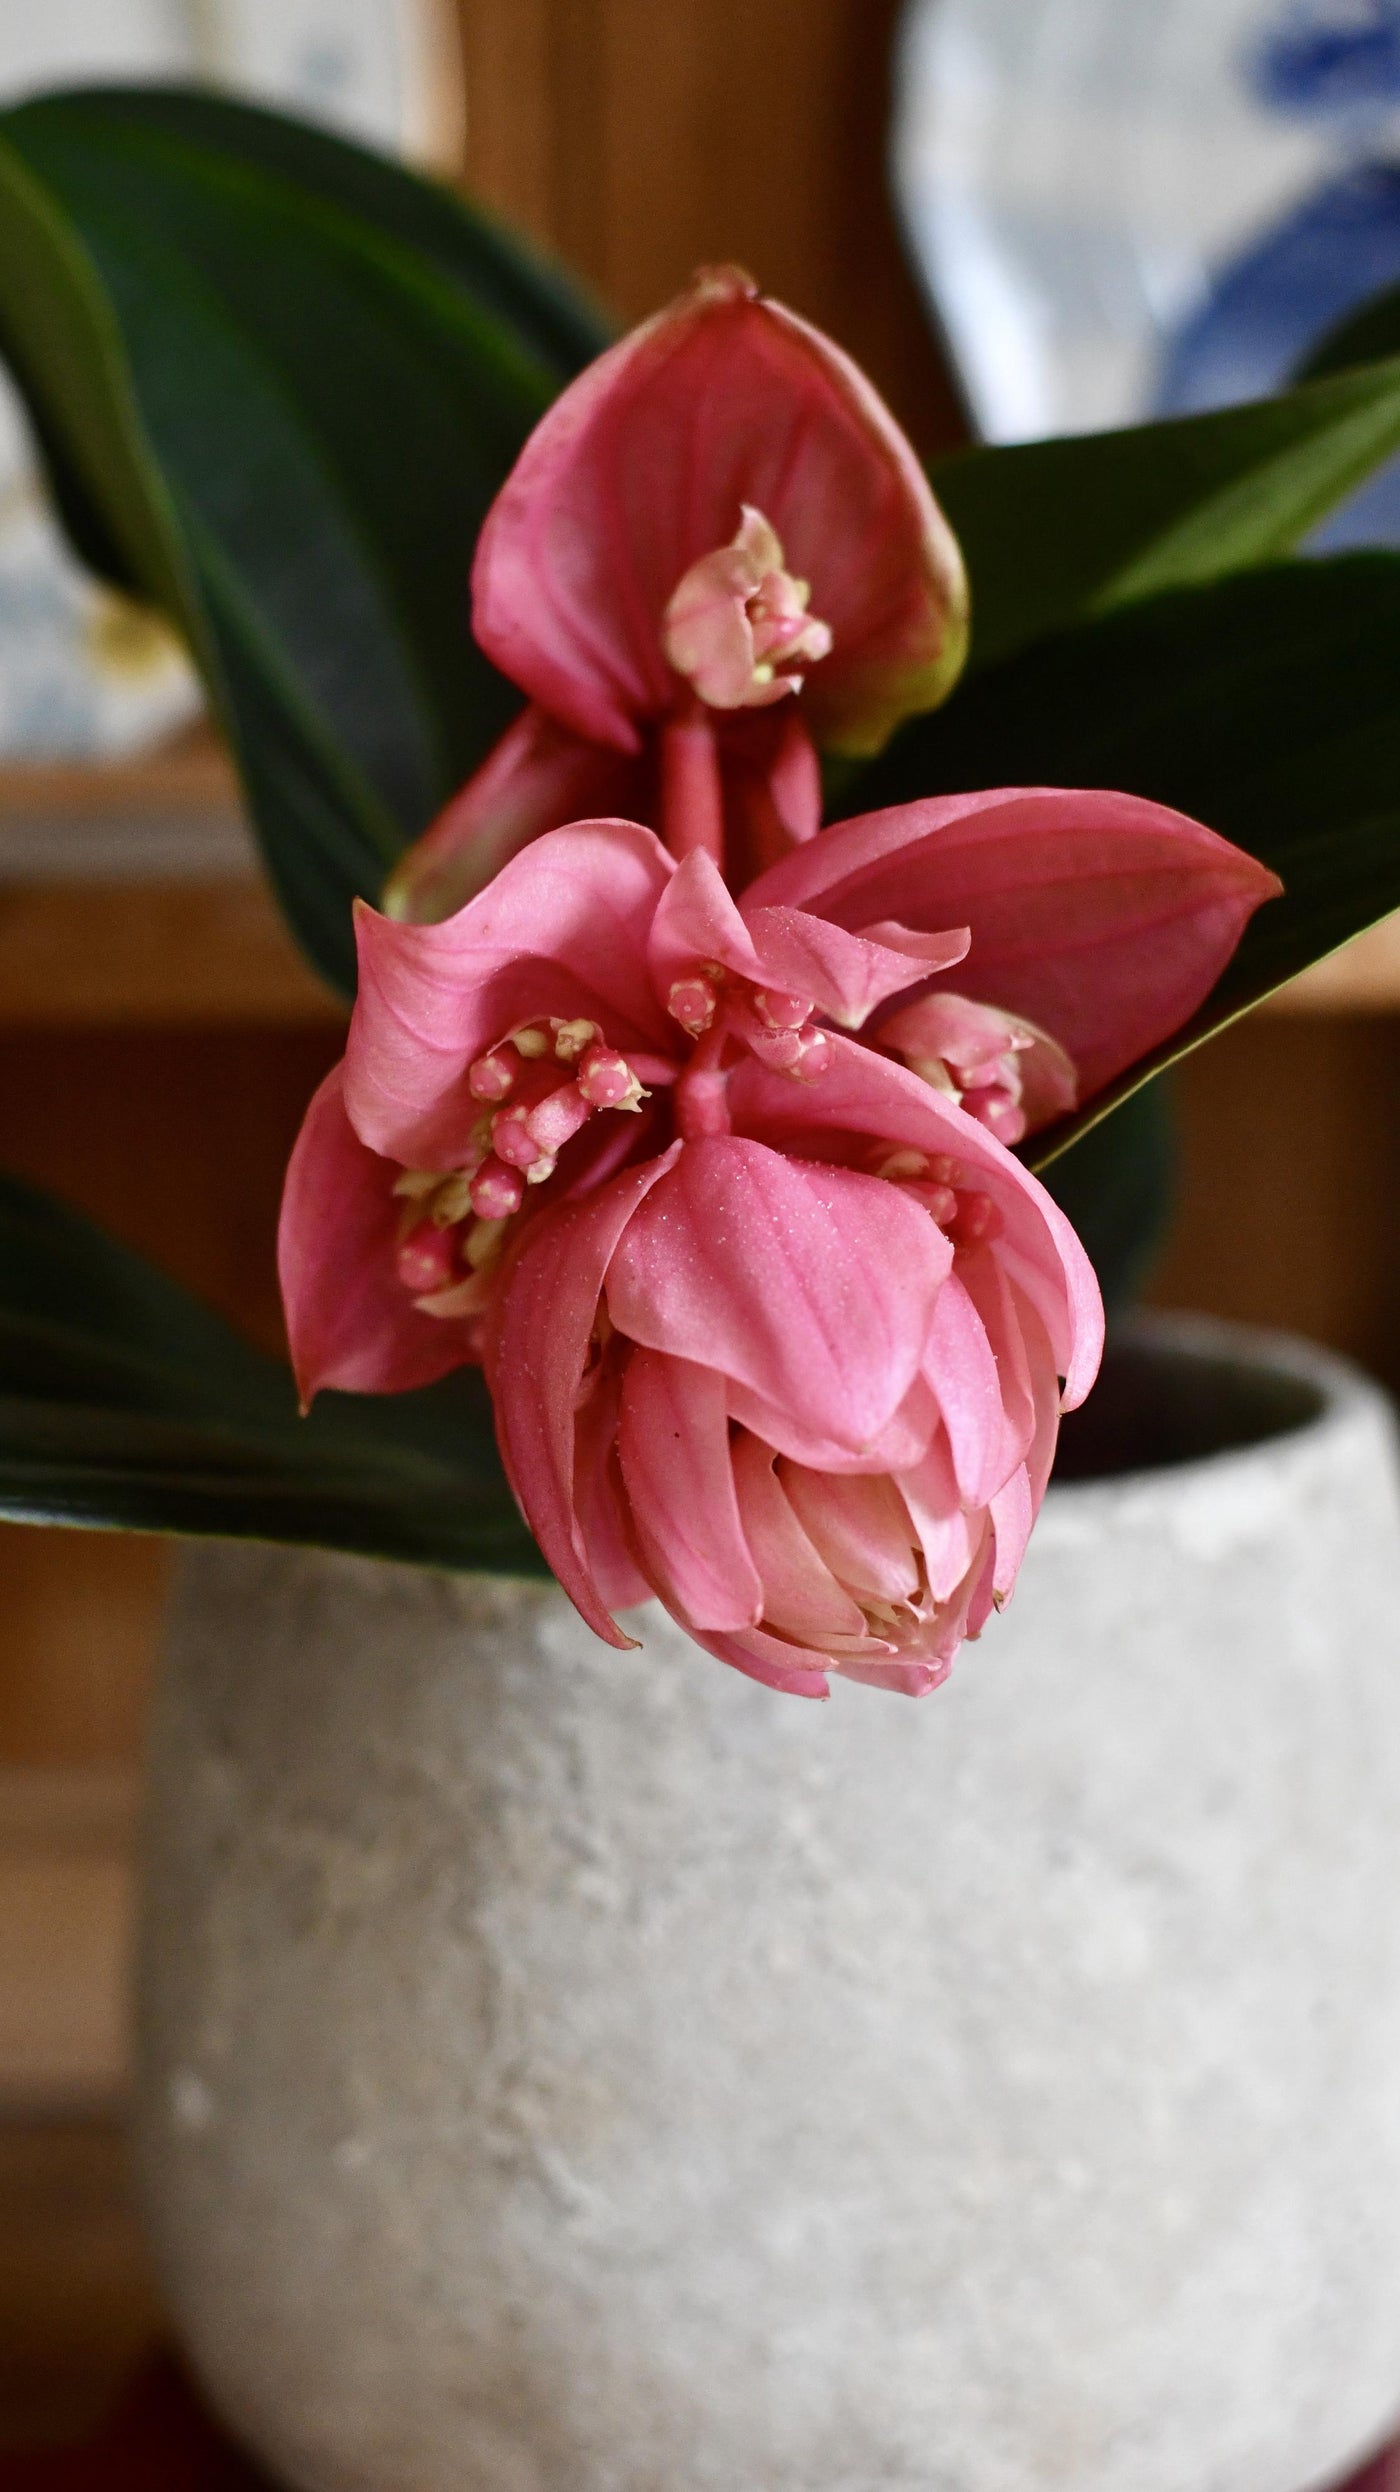 Philippine Orchid: Medinilla Magnifica - Exquisite Rose Grape Plant with Showy Pink Lanterns - Malaysian Orchid Variety